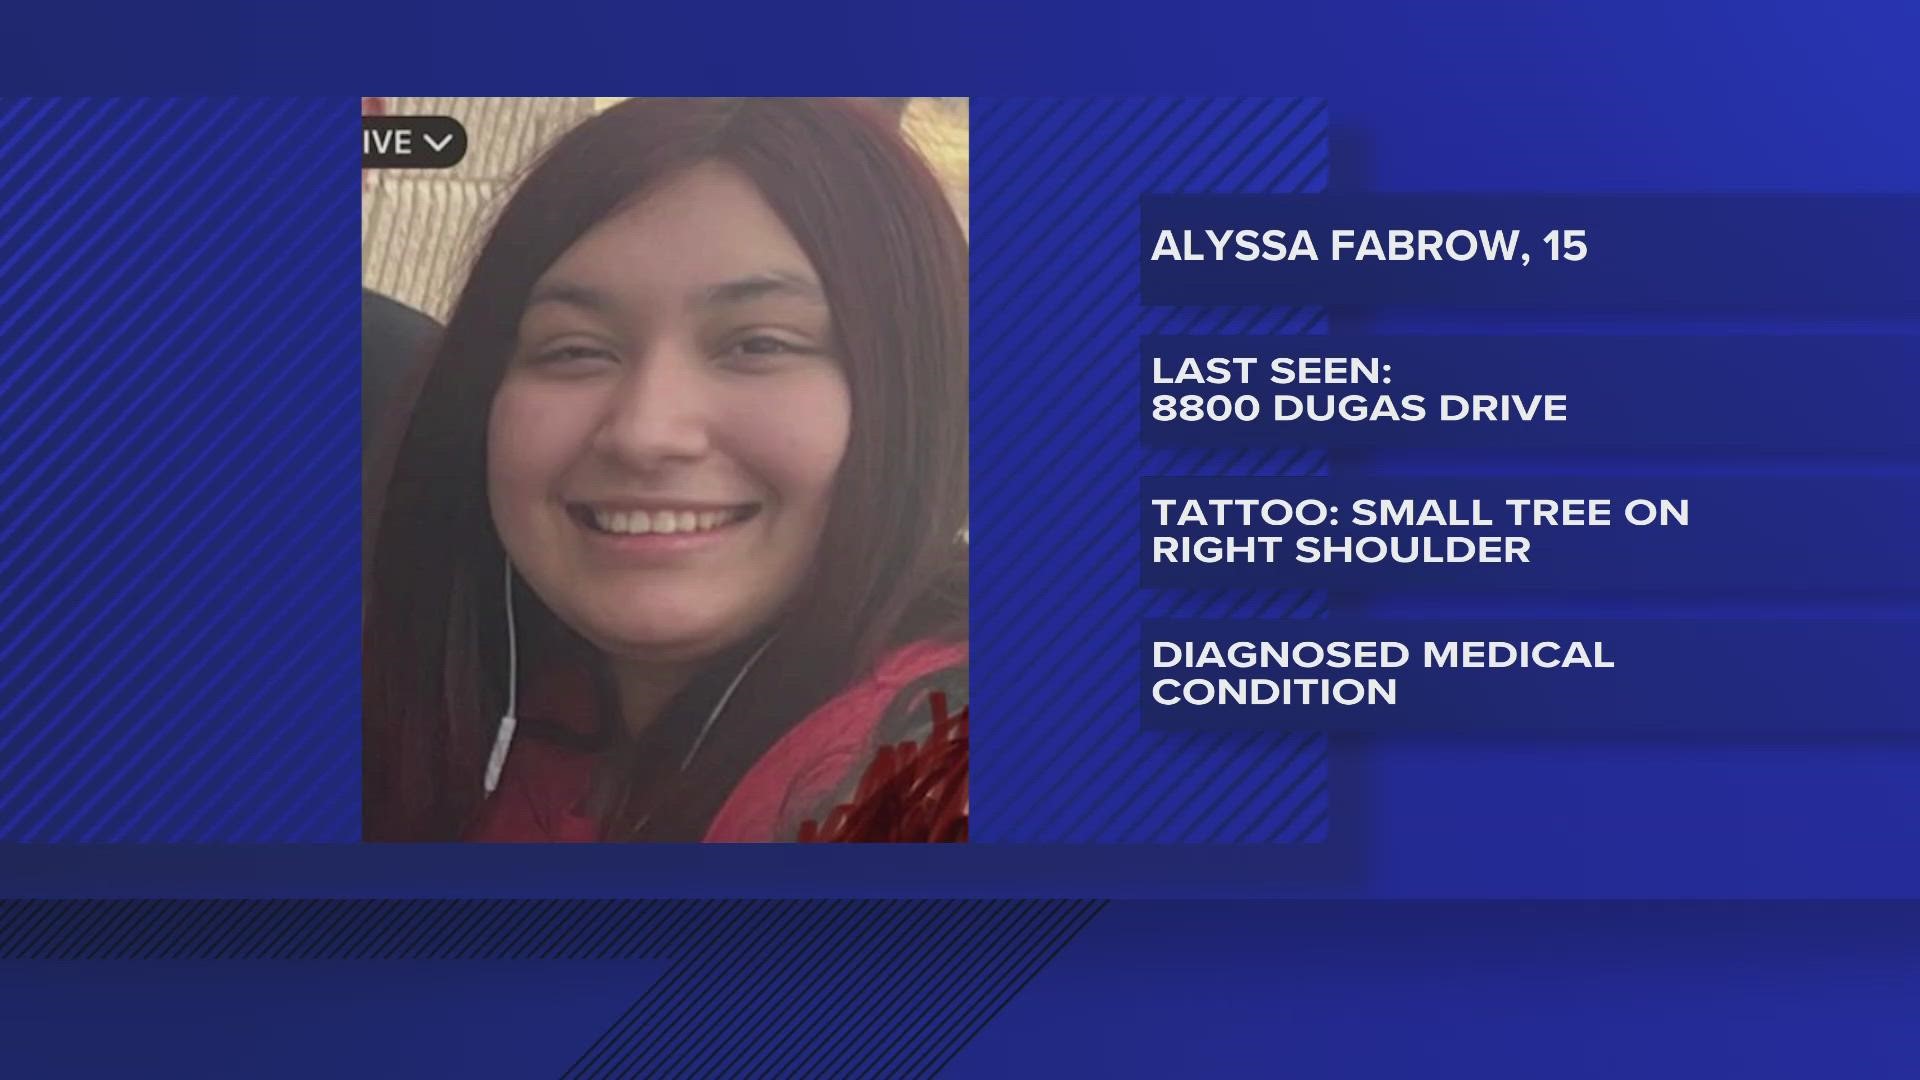 Alyssa Fabrow is described as a white female having brown hair, brown eyes, around 5 feet tall, weighs 170 pounds.